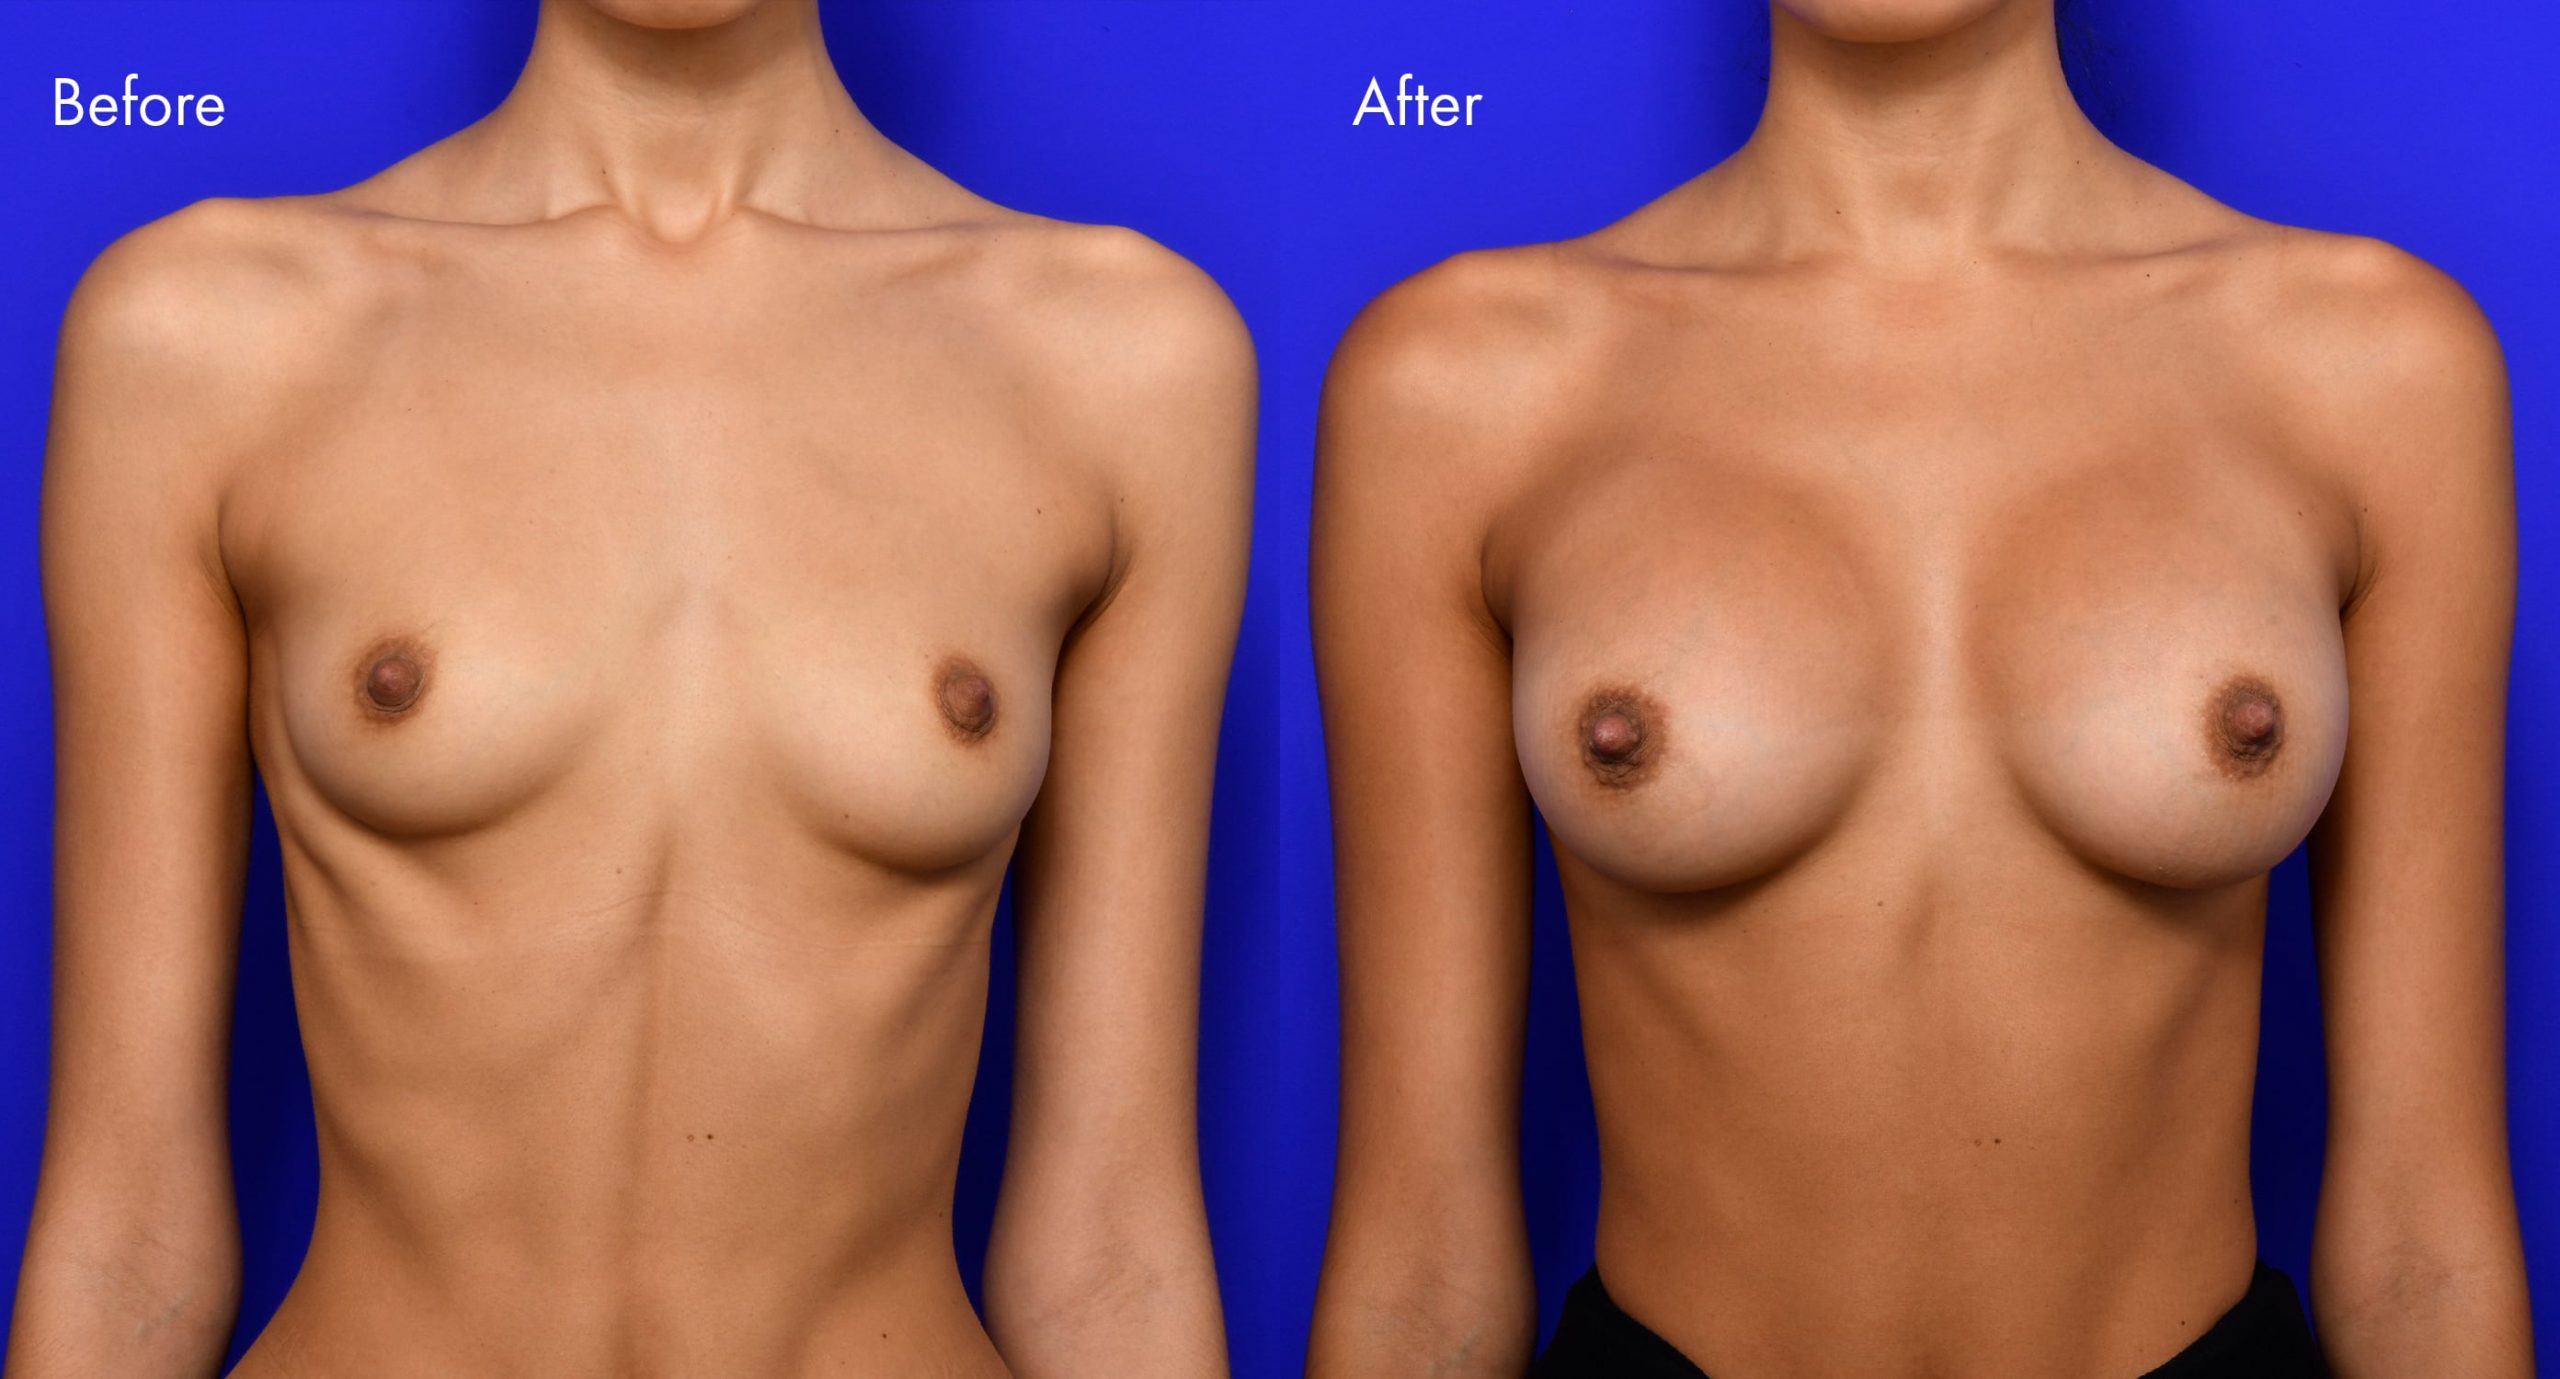 Plastic Surgery Before and After Gallery | 4